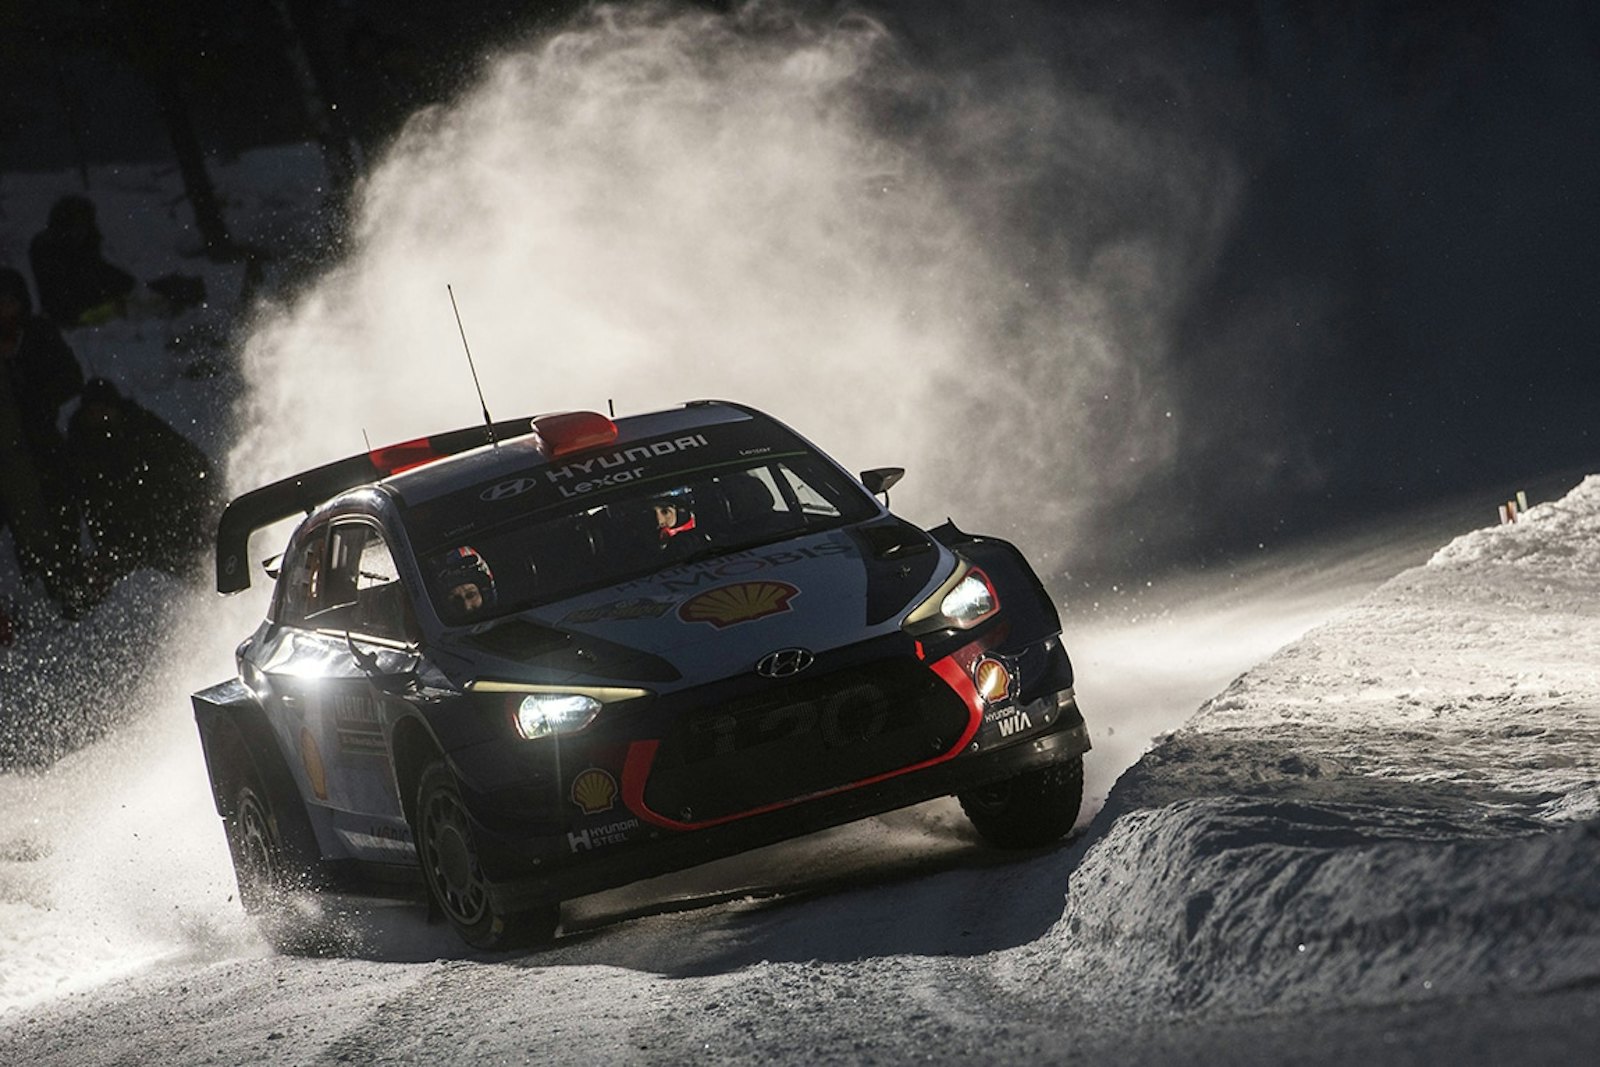 Dani Sordo (ESP) competes during the FIA World Rally Championship 2017 in Torsby, Sweden on February 12, 2017 // Jaanus Ree/Red Bull Content Pool // P-20170212-00413 // Usage for editorial use only // Please go to www.redbullcontentpool.com for further information. //